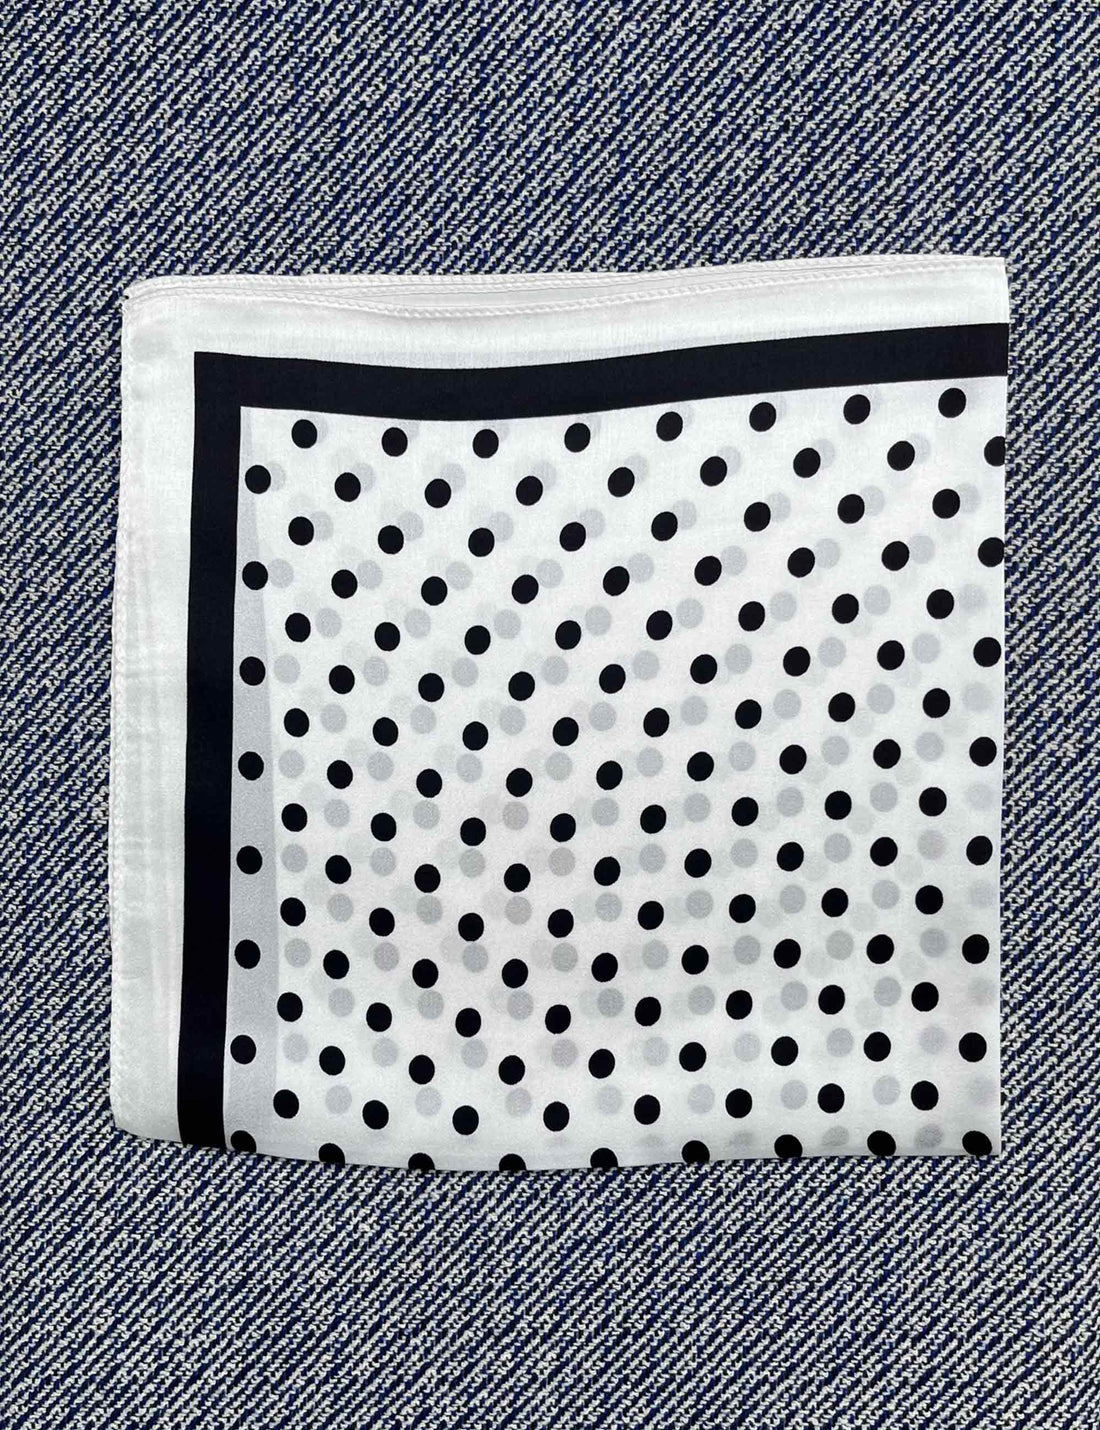 Silk scarf off white/black dots and stripe